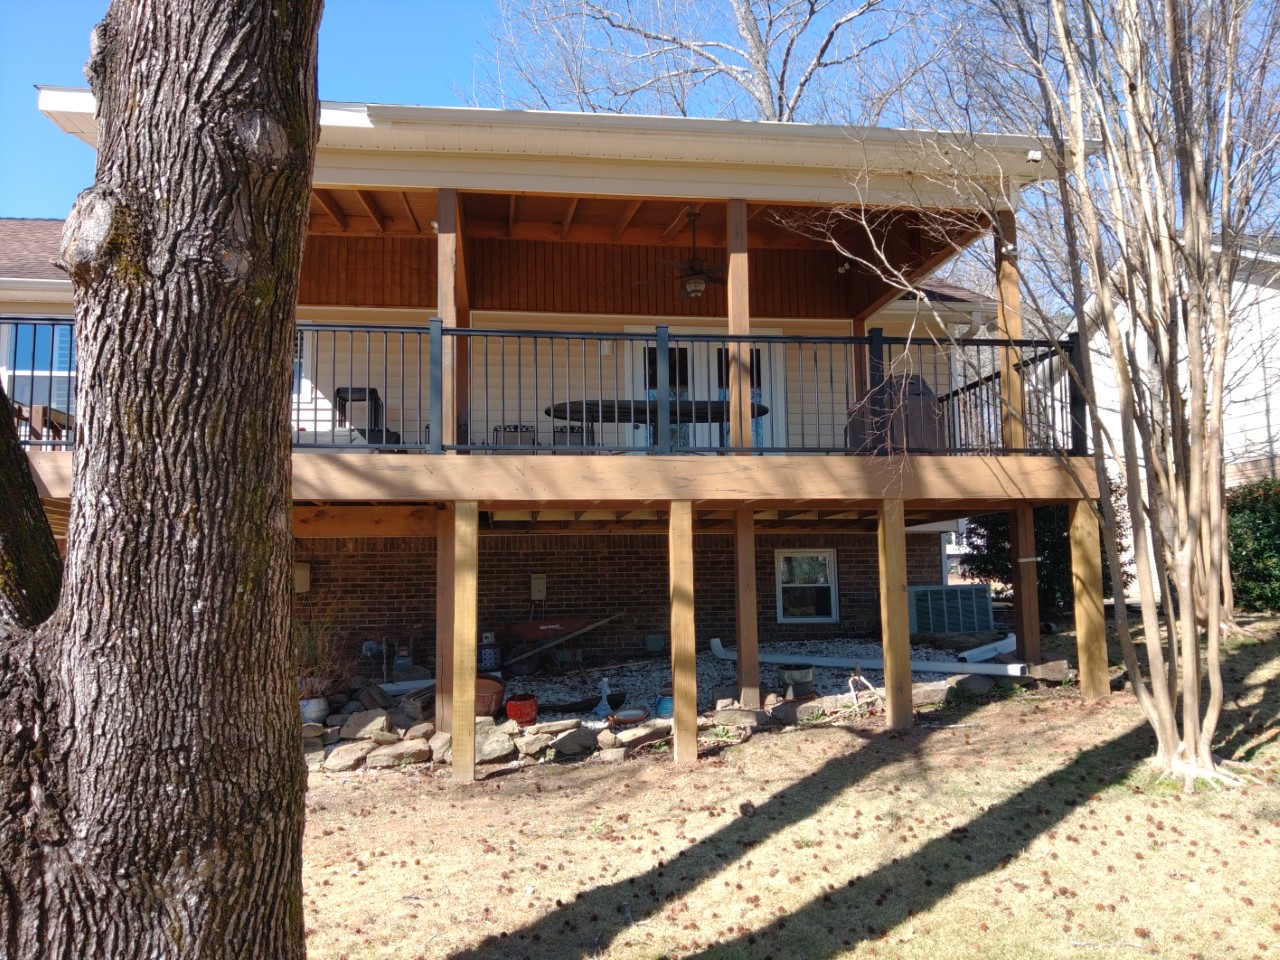 Alt Angle of Pelham Deck and Porch Addition Archadeck